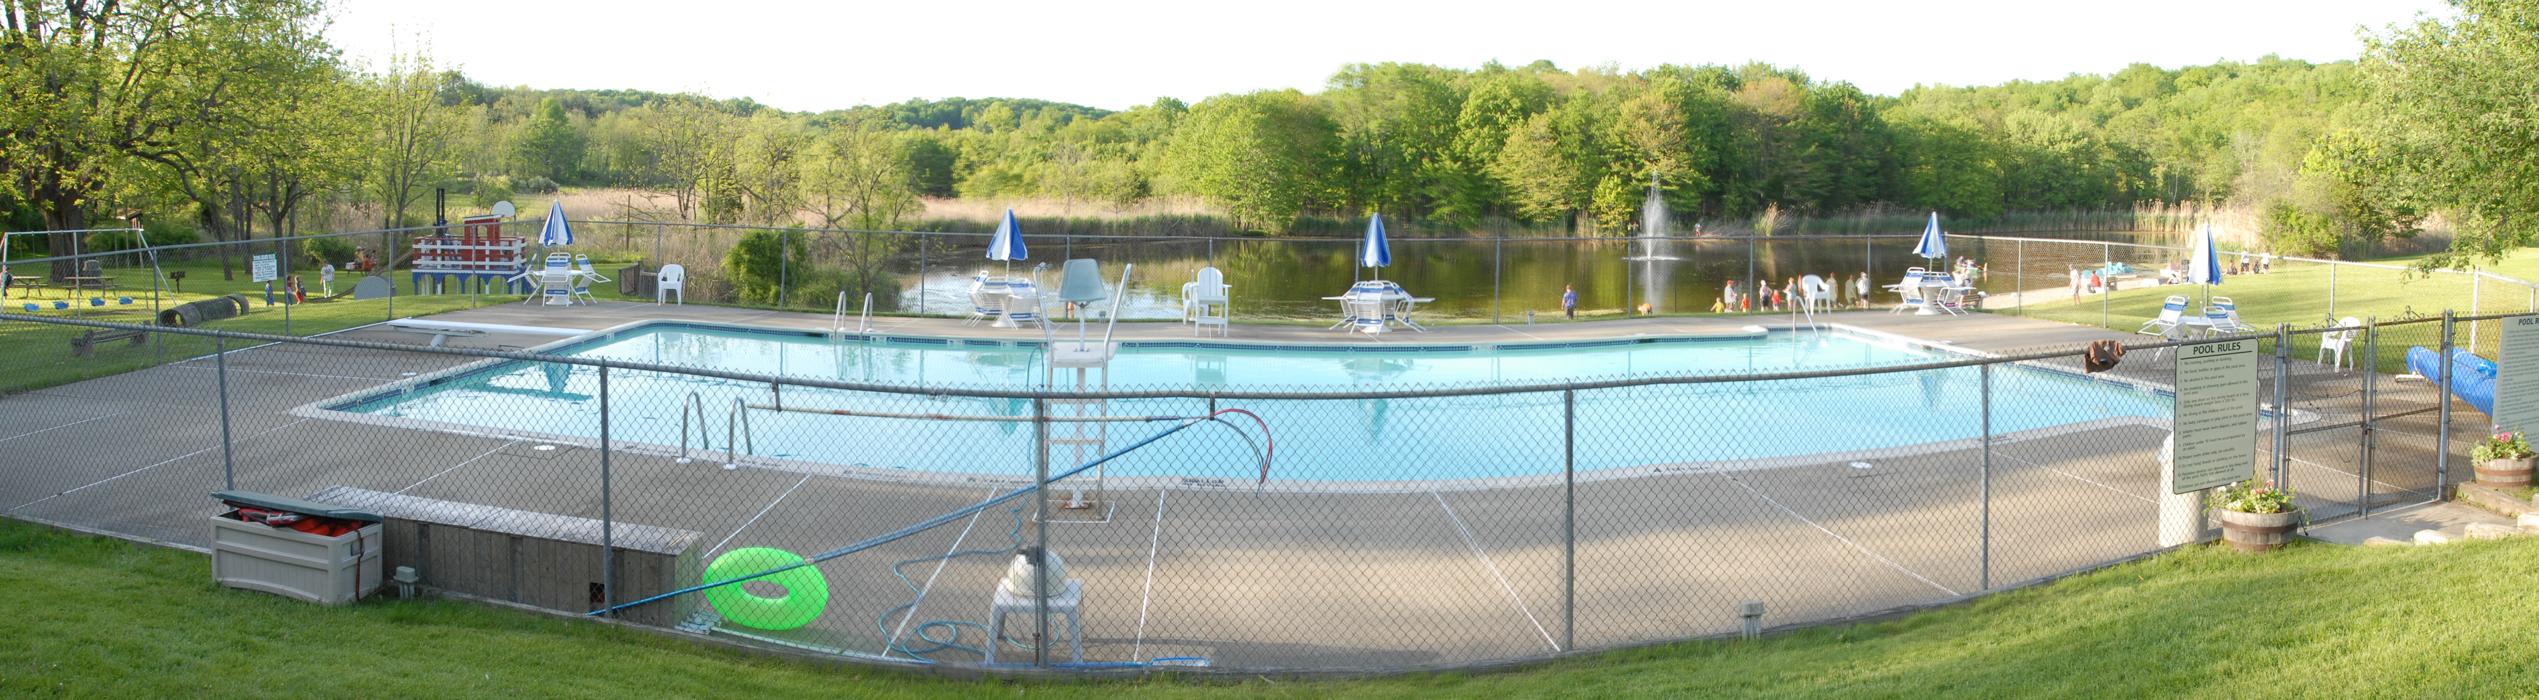 fence, panoramic, pool, water